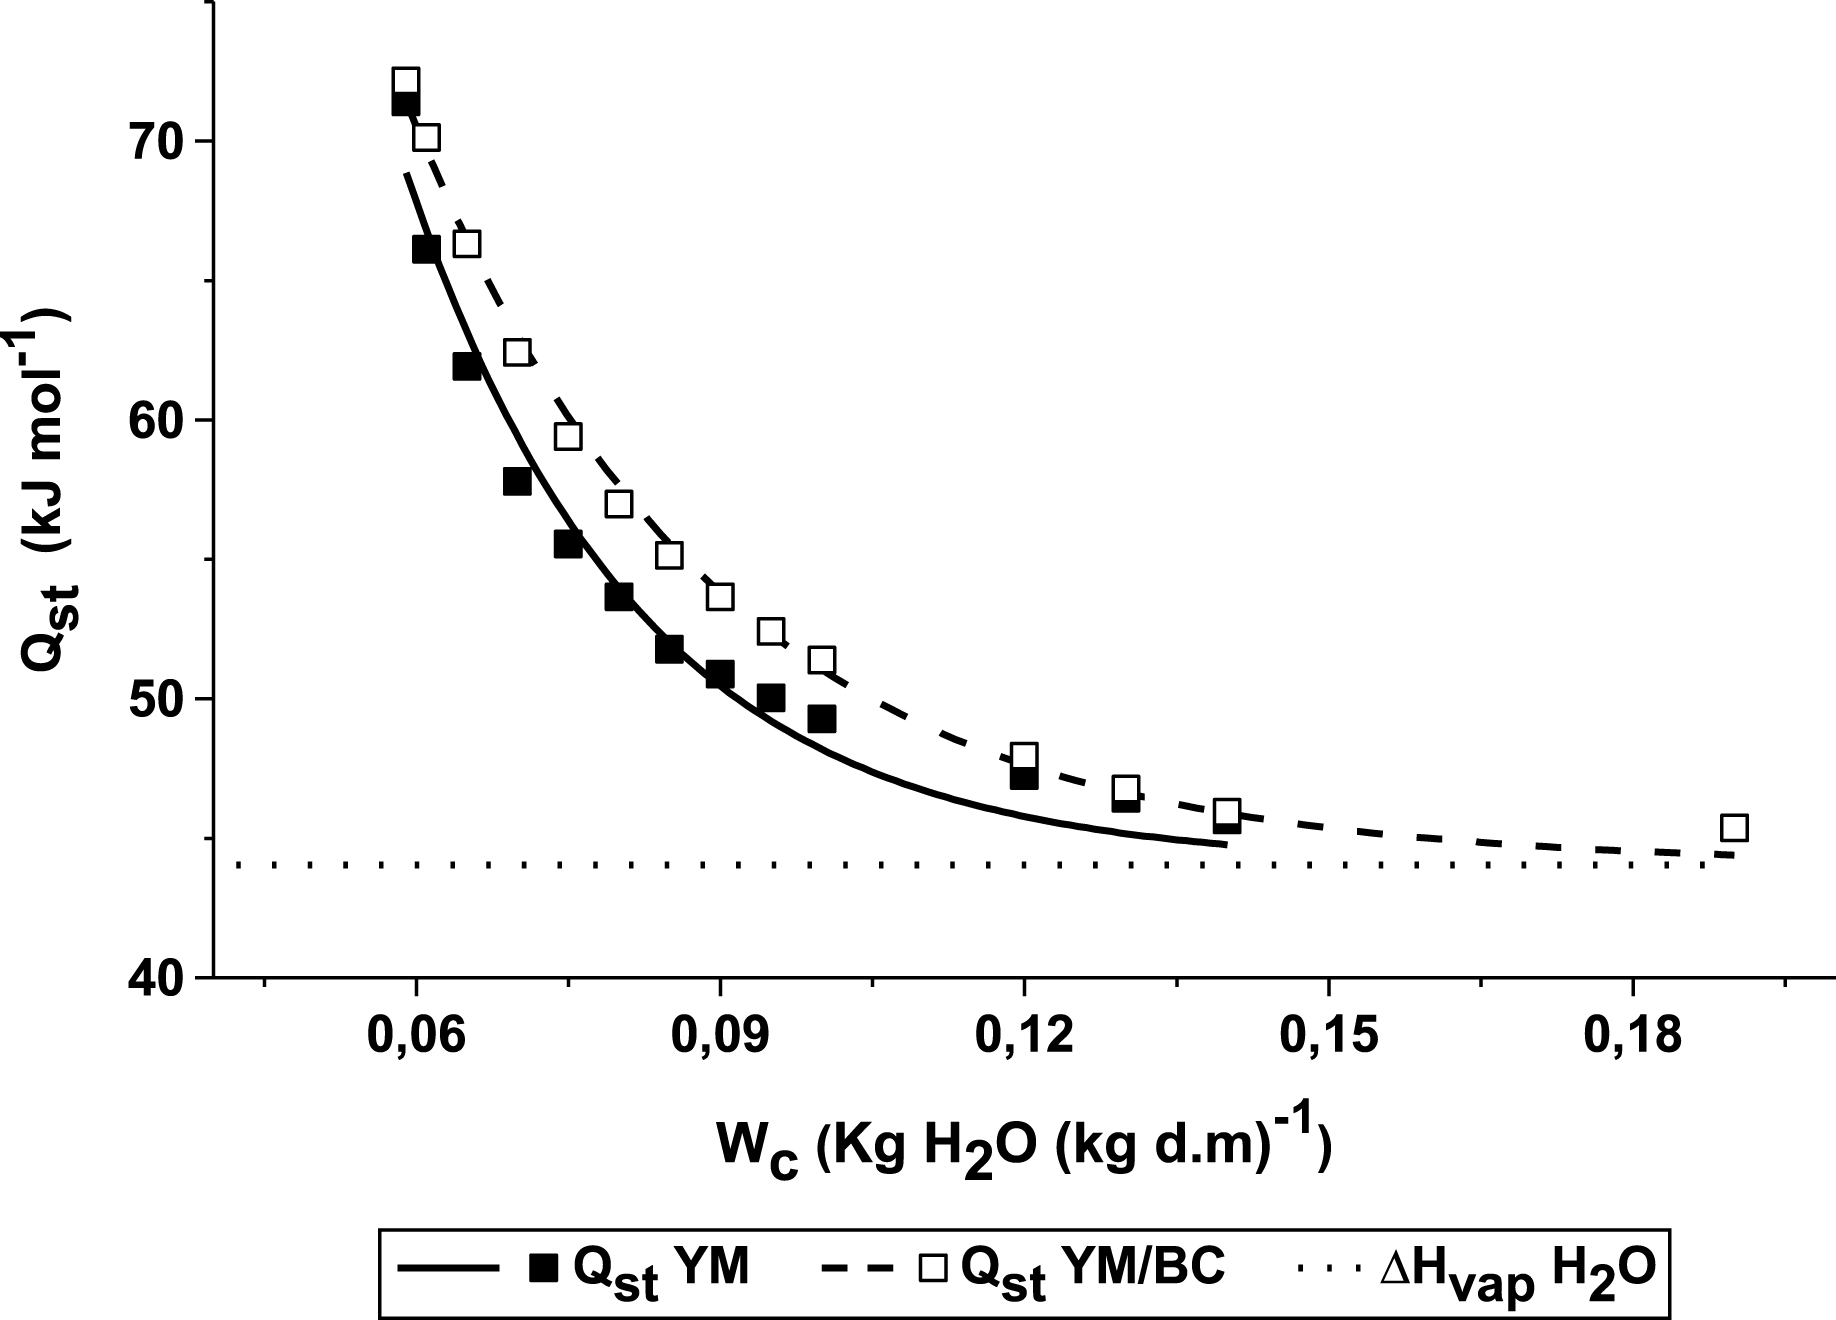 Changes of the BC/YM and YM sorption heat with equilibrium moisture content. The lines represent the sorption heat predicted by Equation (9).